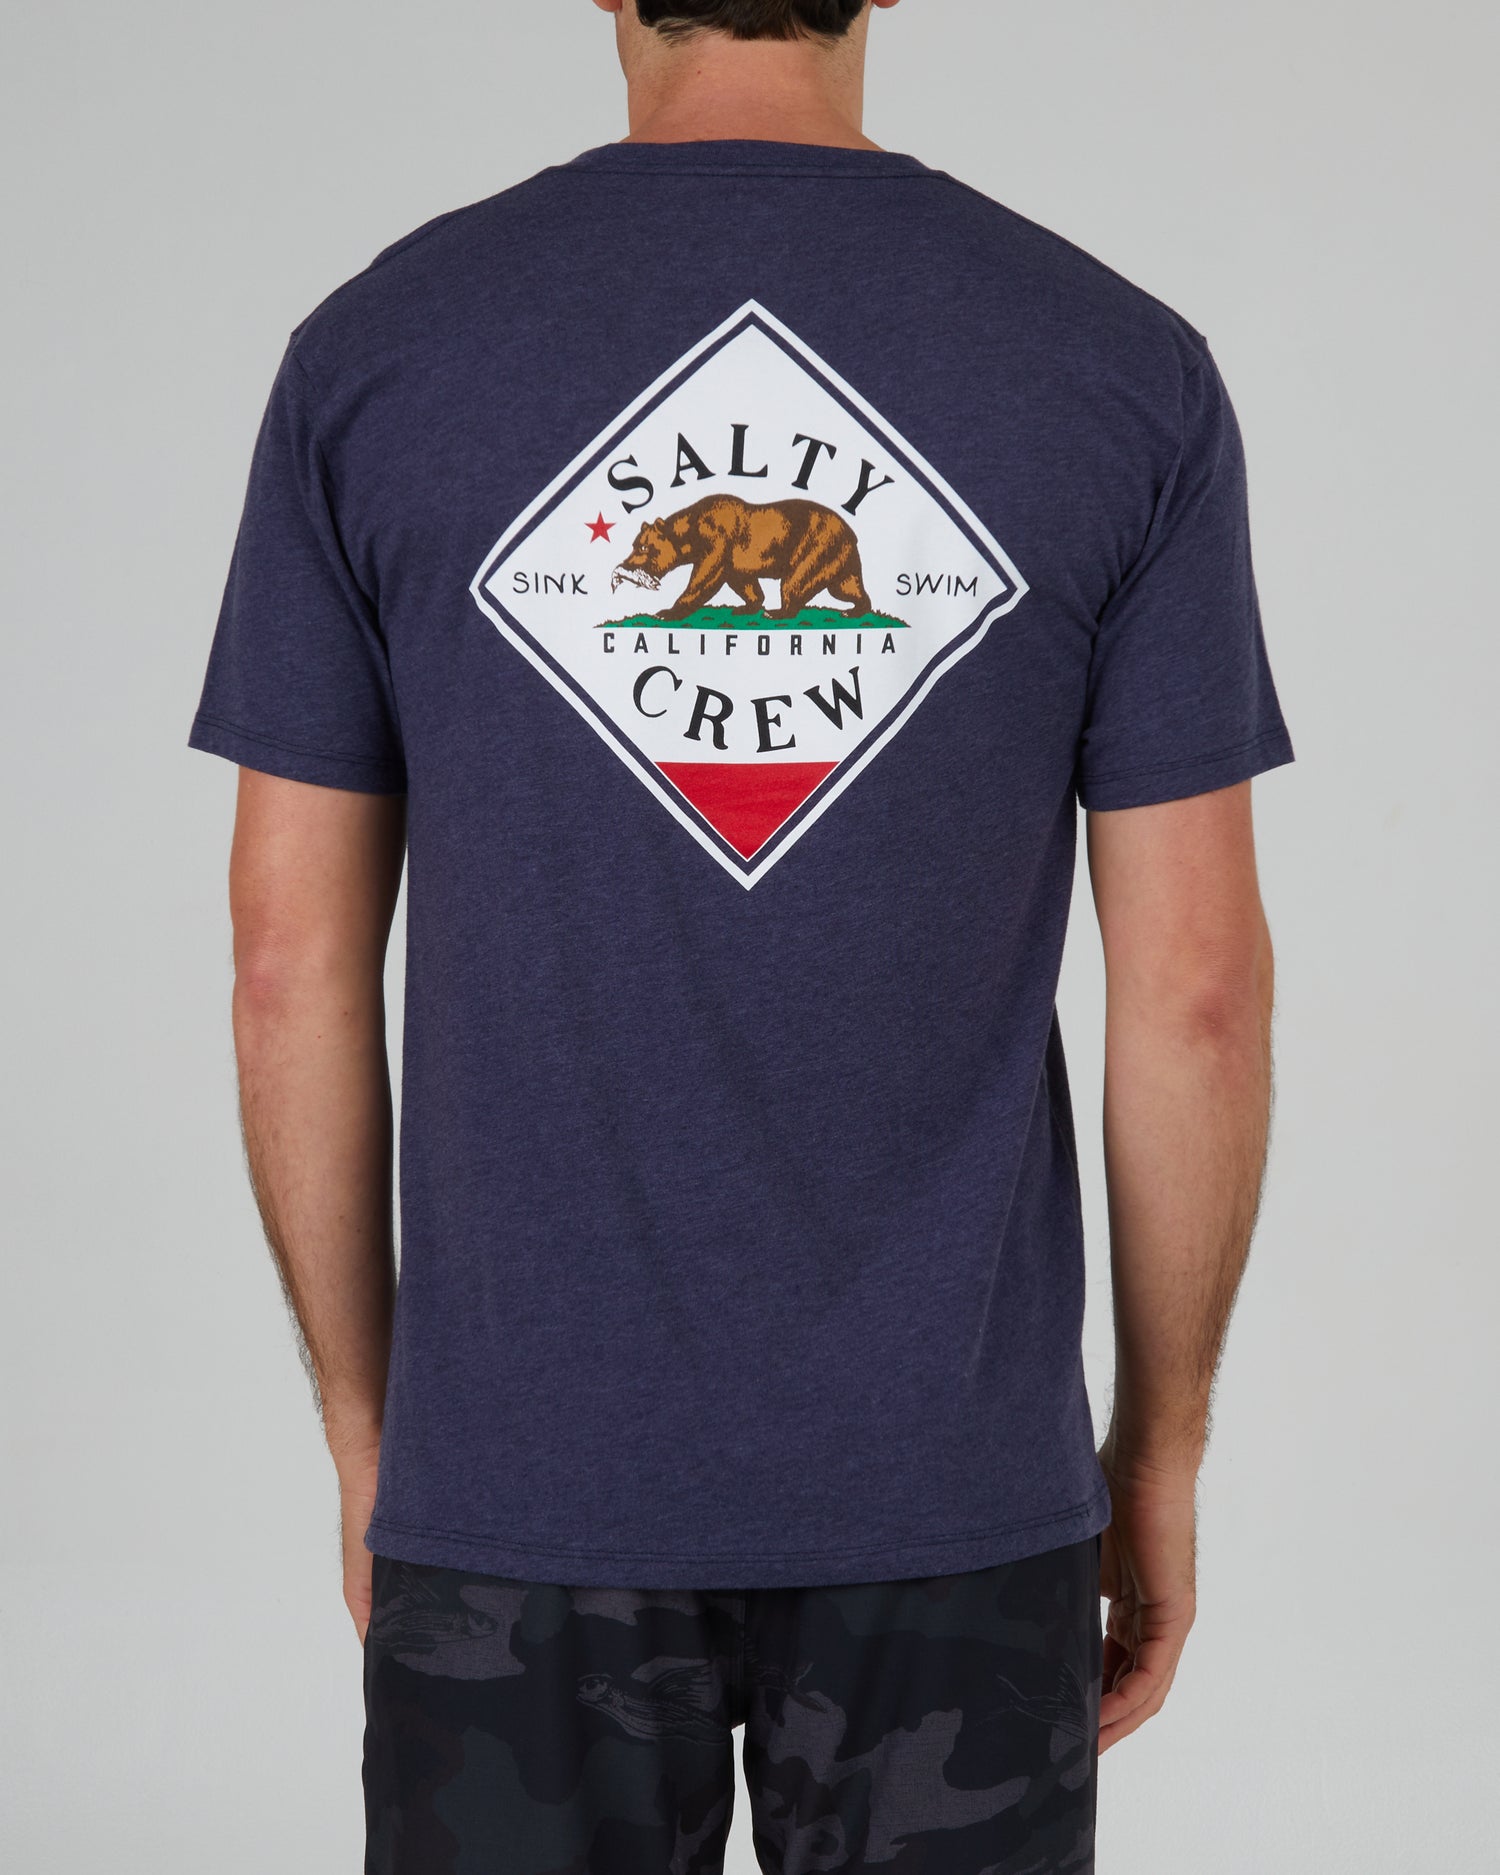 On body back of the Tippet Cali Navy Heather S/S Premium Tee